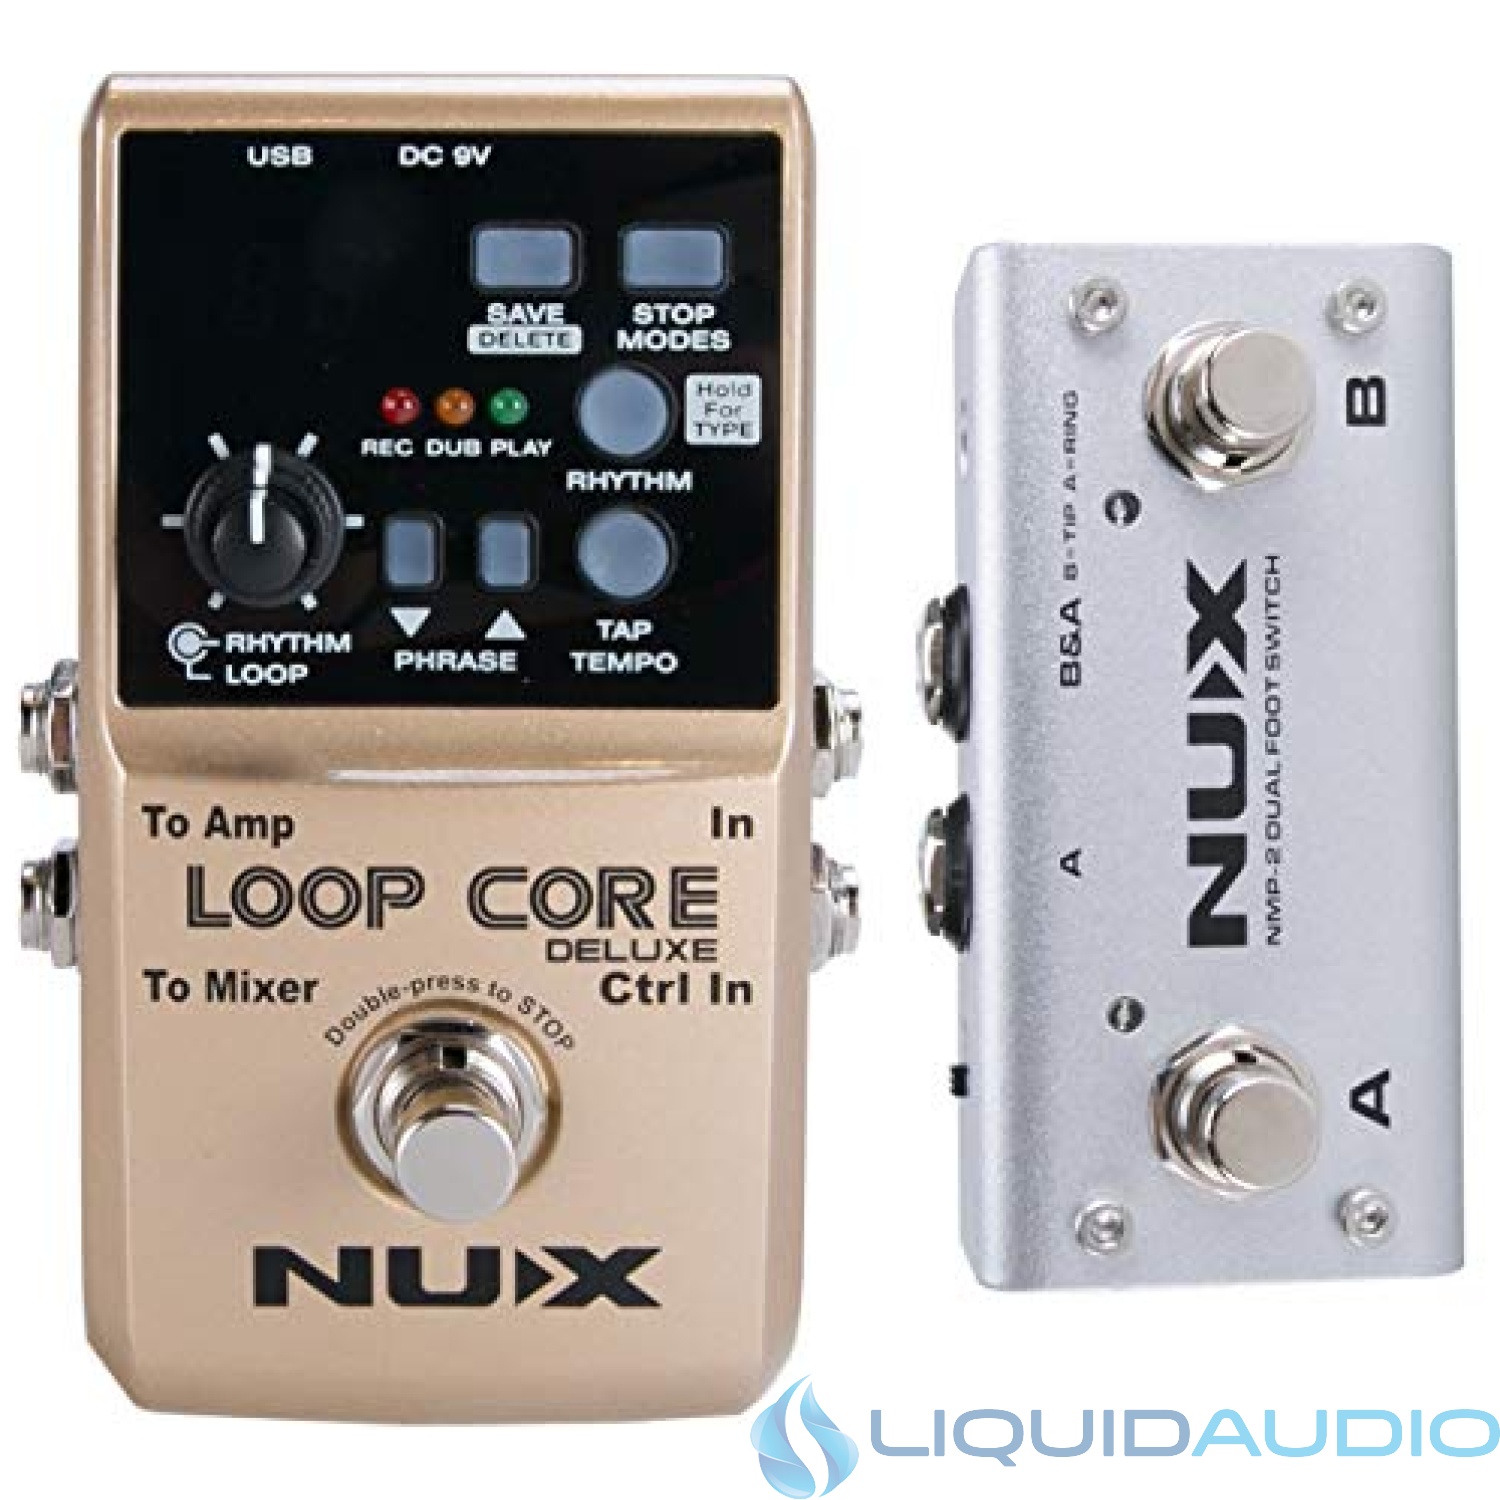 NUX Loop Core Deluxe Guitar Looper 8 hours Loop Time,24-bit Audio,Automatic Tempo Detection with Footswitch